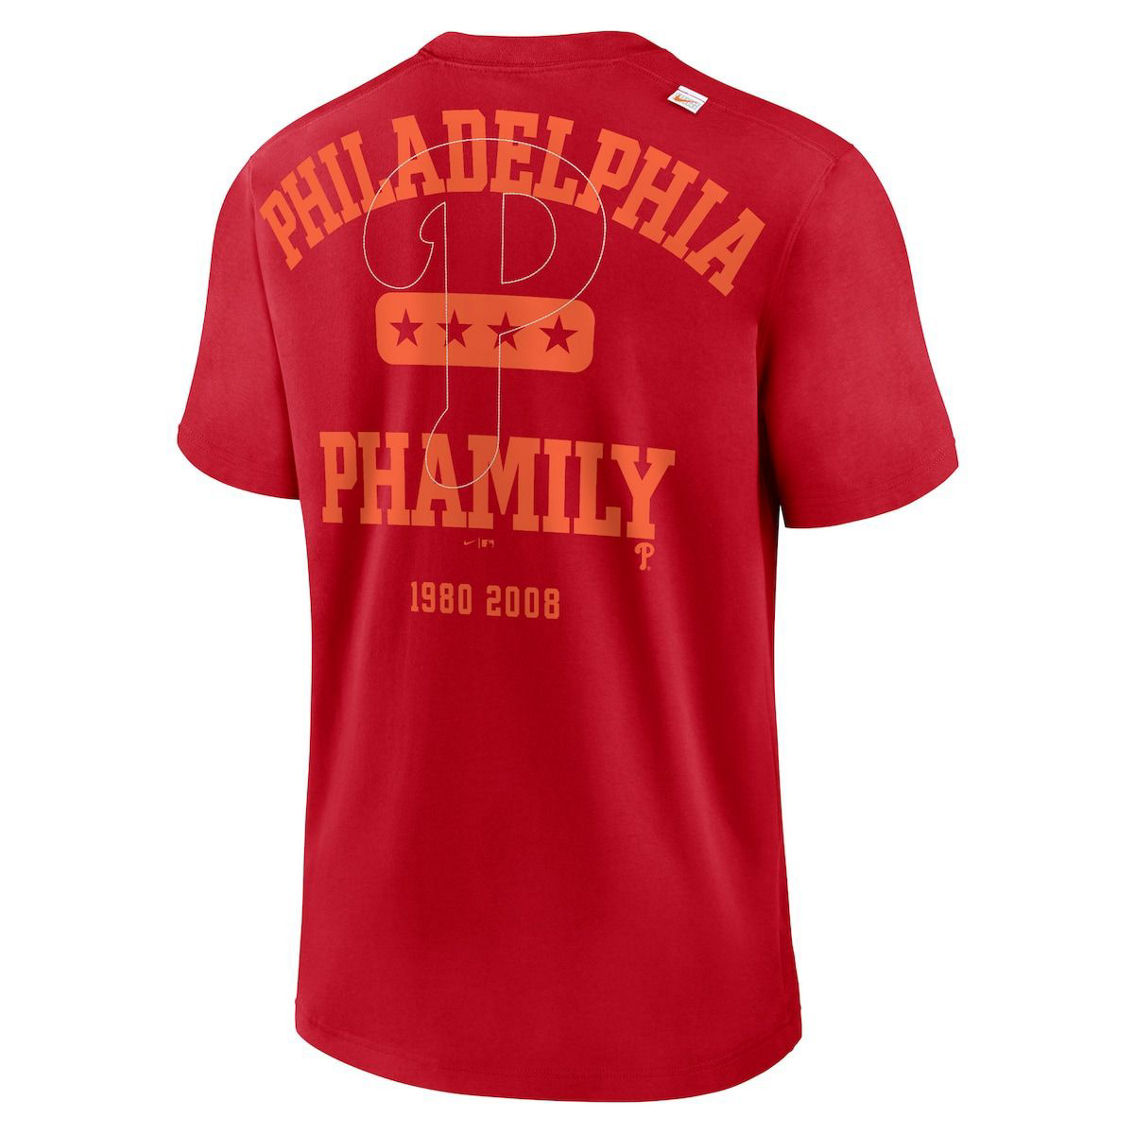 Nike Men's Red Philadelphia Phillies Statement Game Over T-Shirt - Image 4 of 4